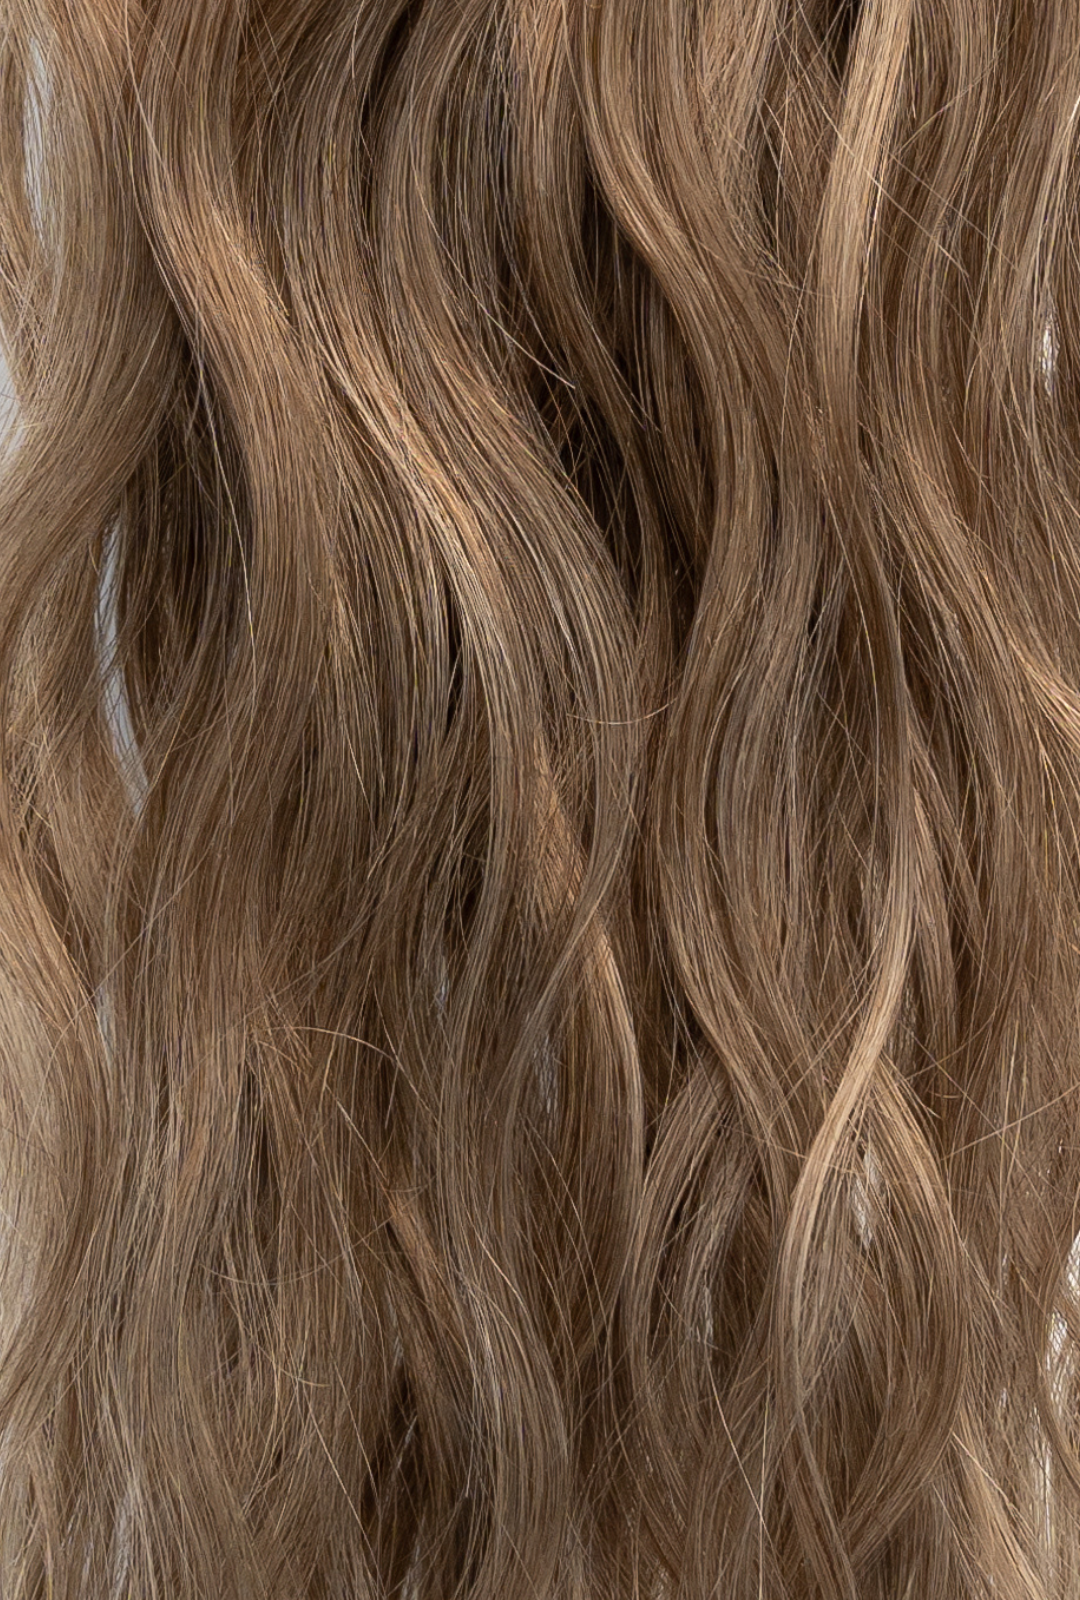 Waved by Laced Hair Machine Sewn Weft Extensions #8